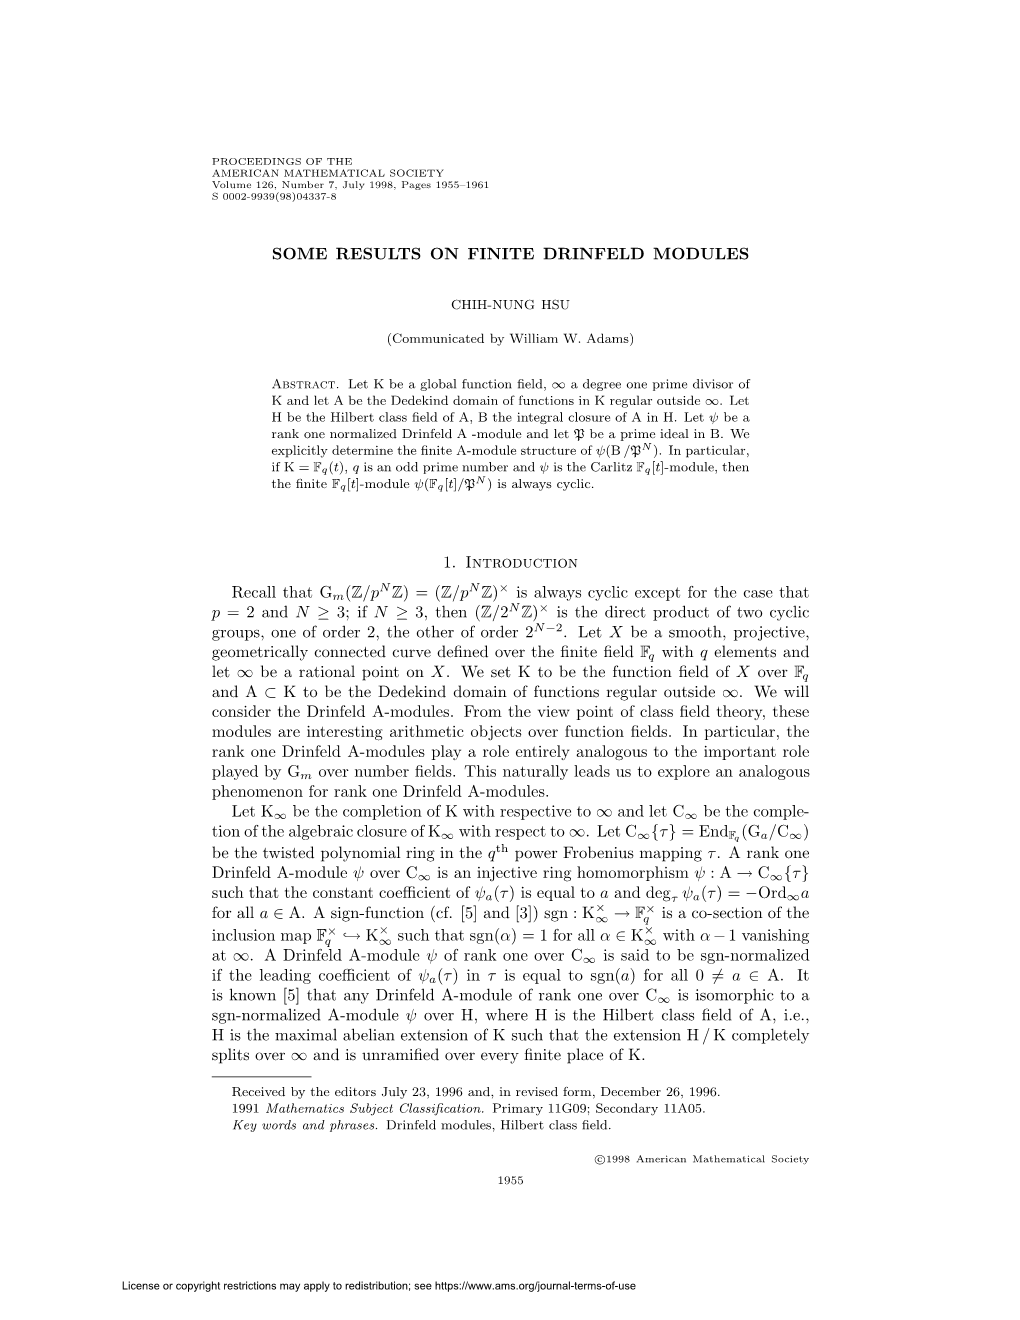 Some Results on Finite Drinfeld Modules 1957